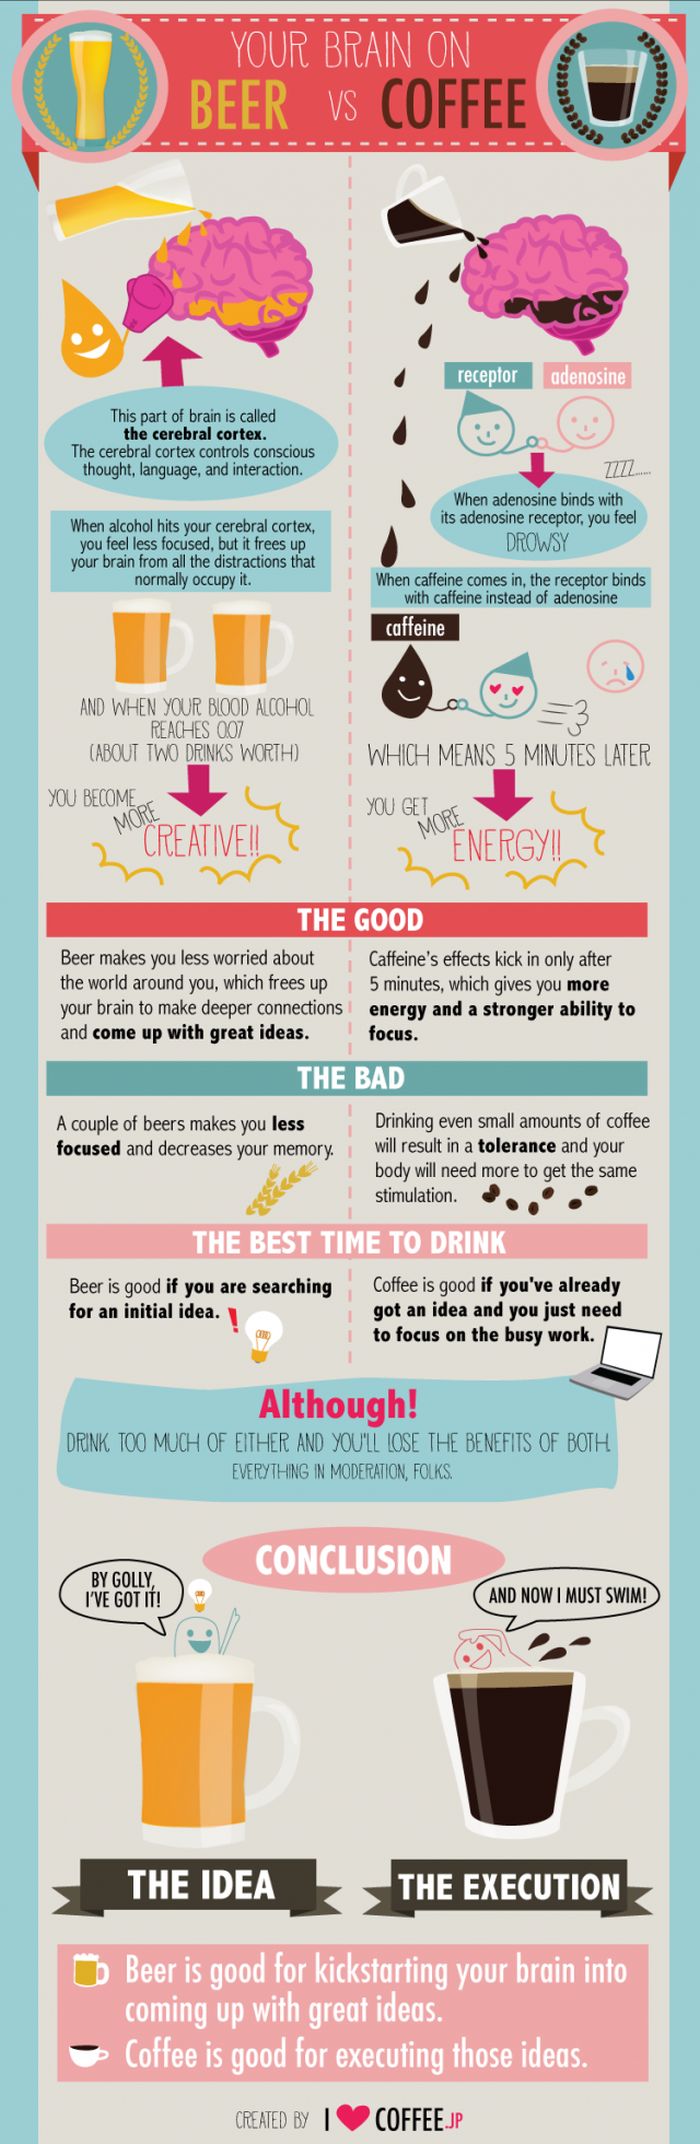 Your Brain On Beer vs Coffee (infographic)